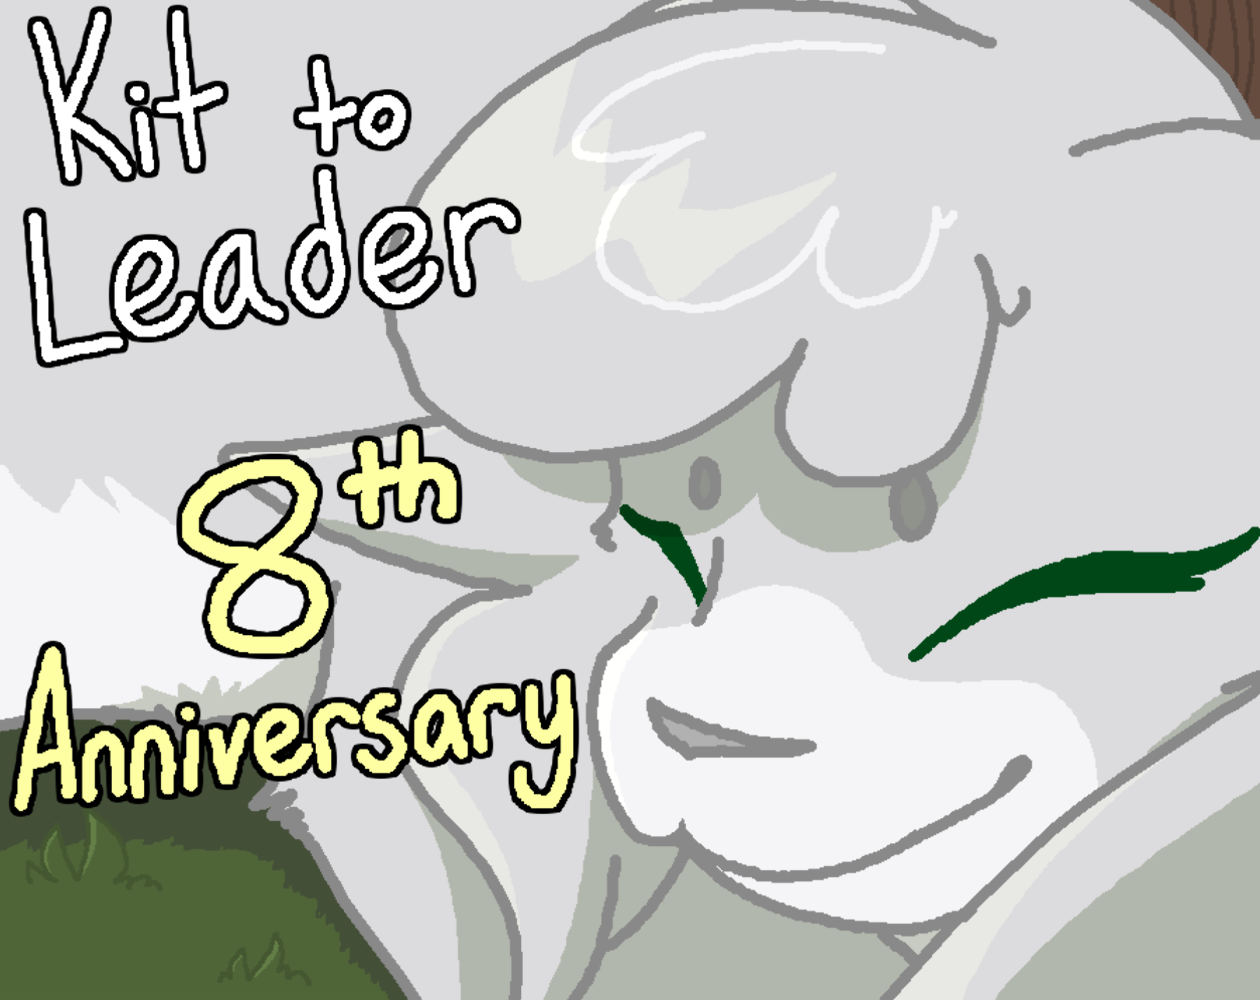 Kit to Leader: 8 Year Anniversary by moss-shadow